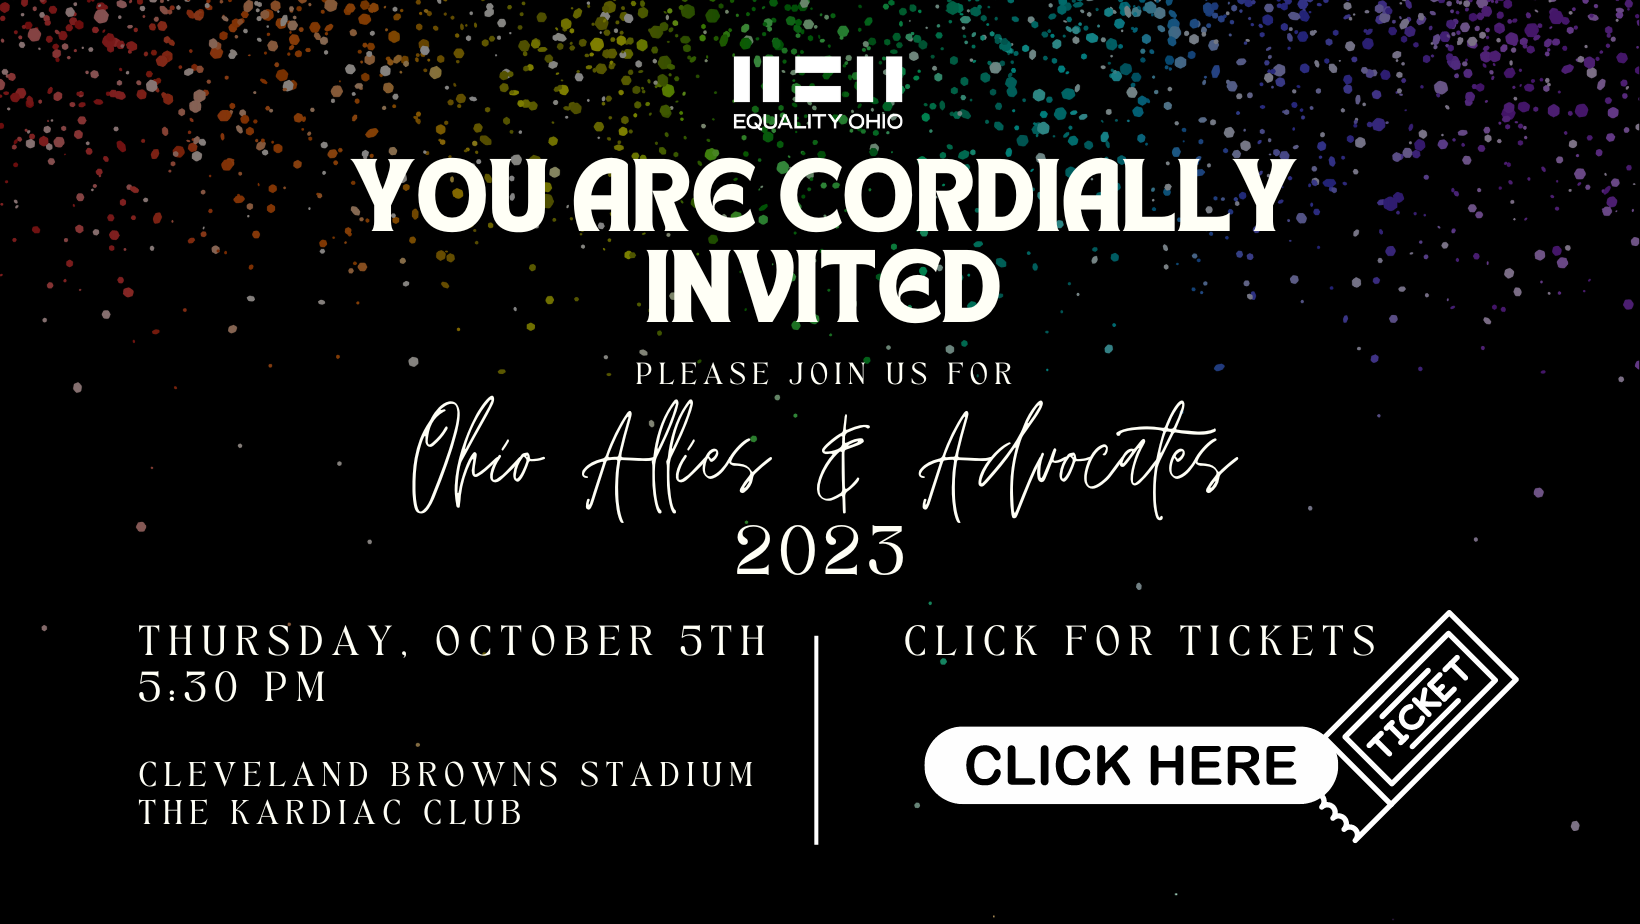 Click to purchase tickets for Ohio Allies & Advocates 2023